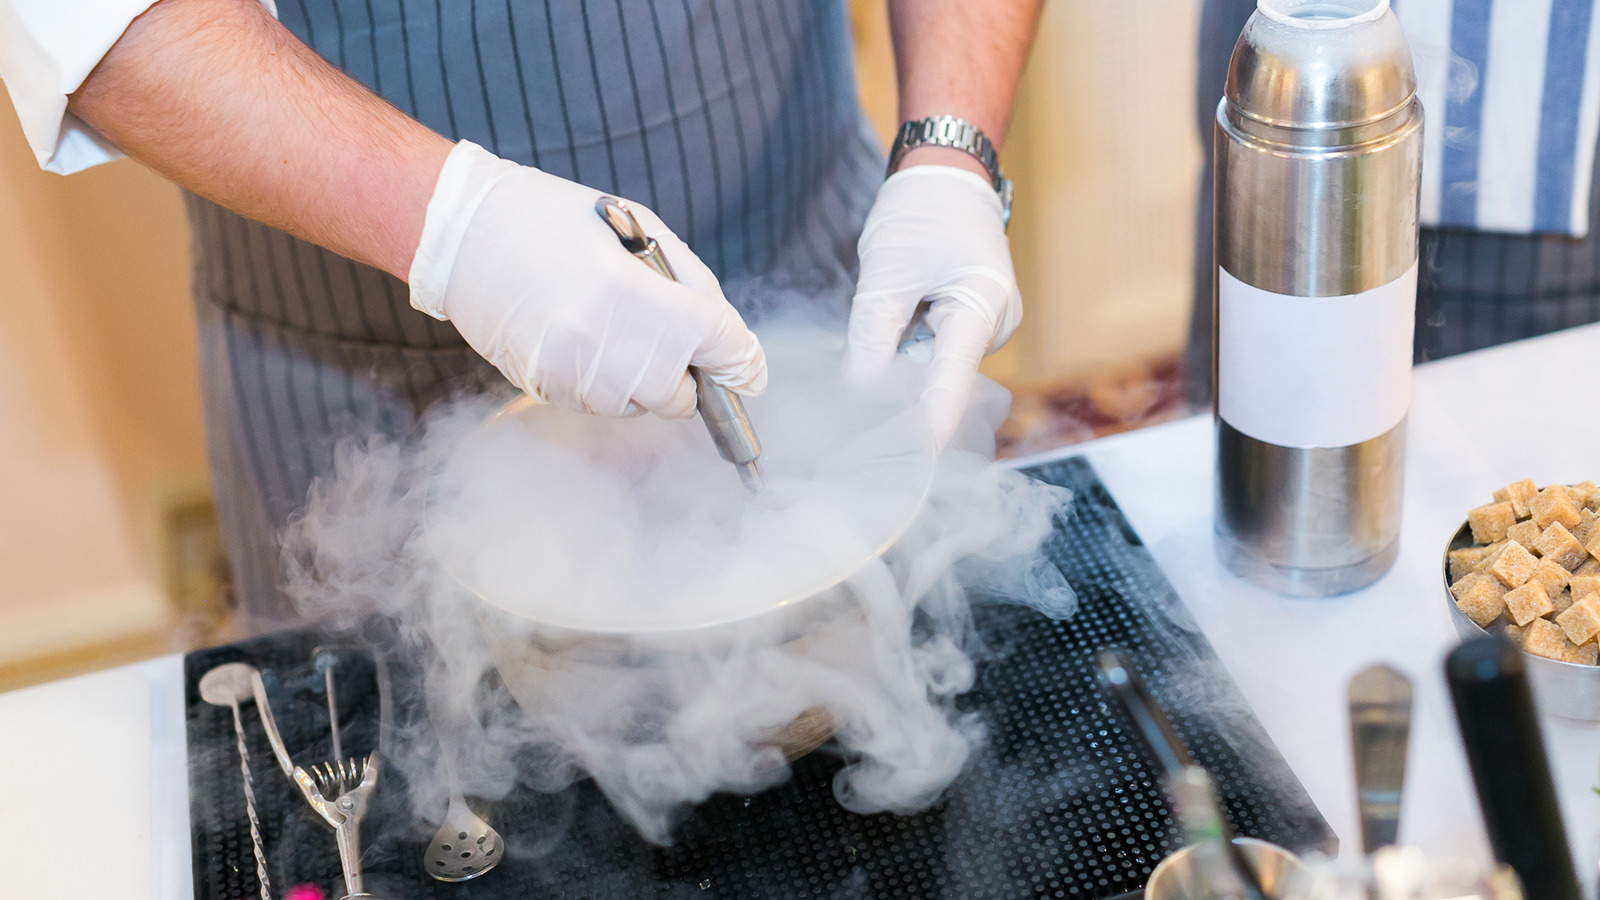 https://www.tastingtable.com/img/gallery/is-it-dangerous-to-use-liquid-nitrogen-while-cooking/l-intro-1662315426.jpg